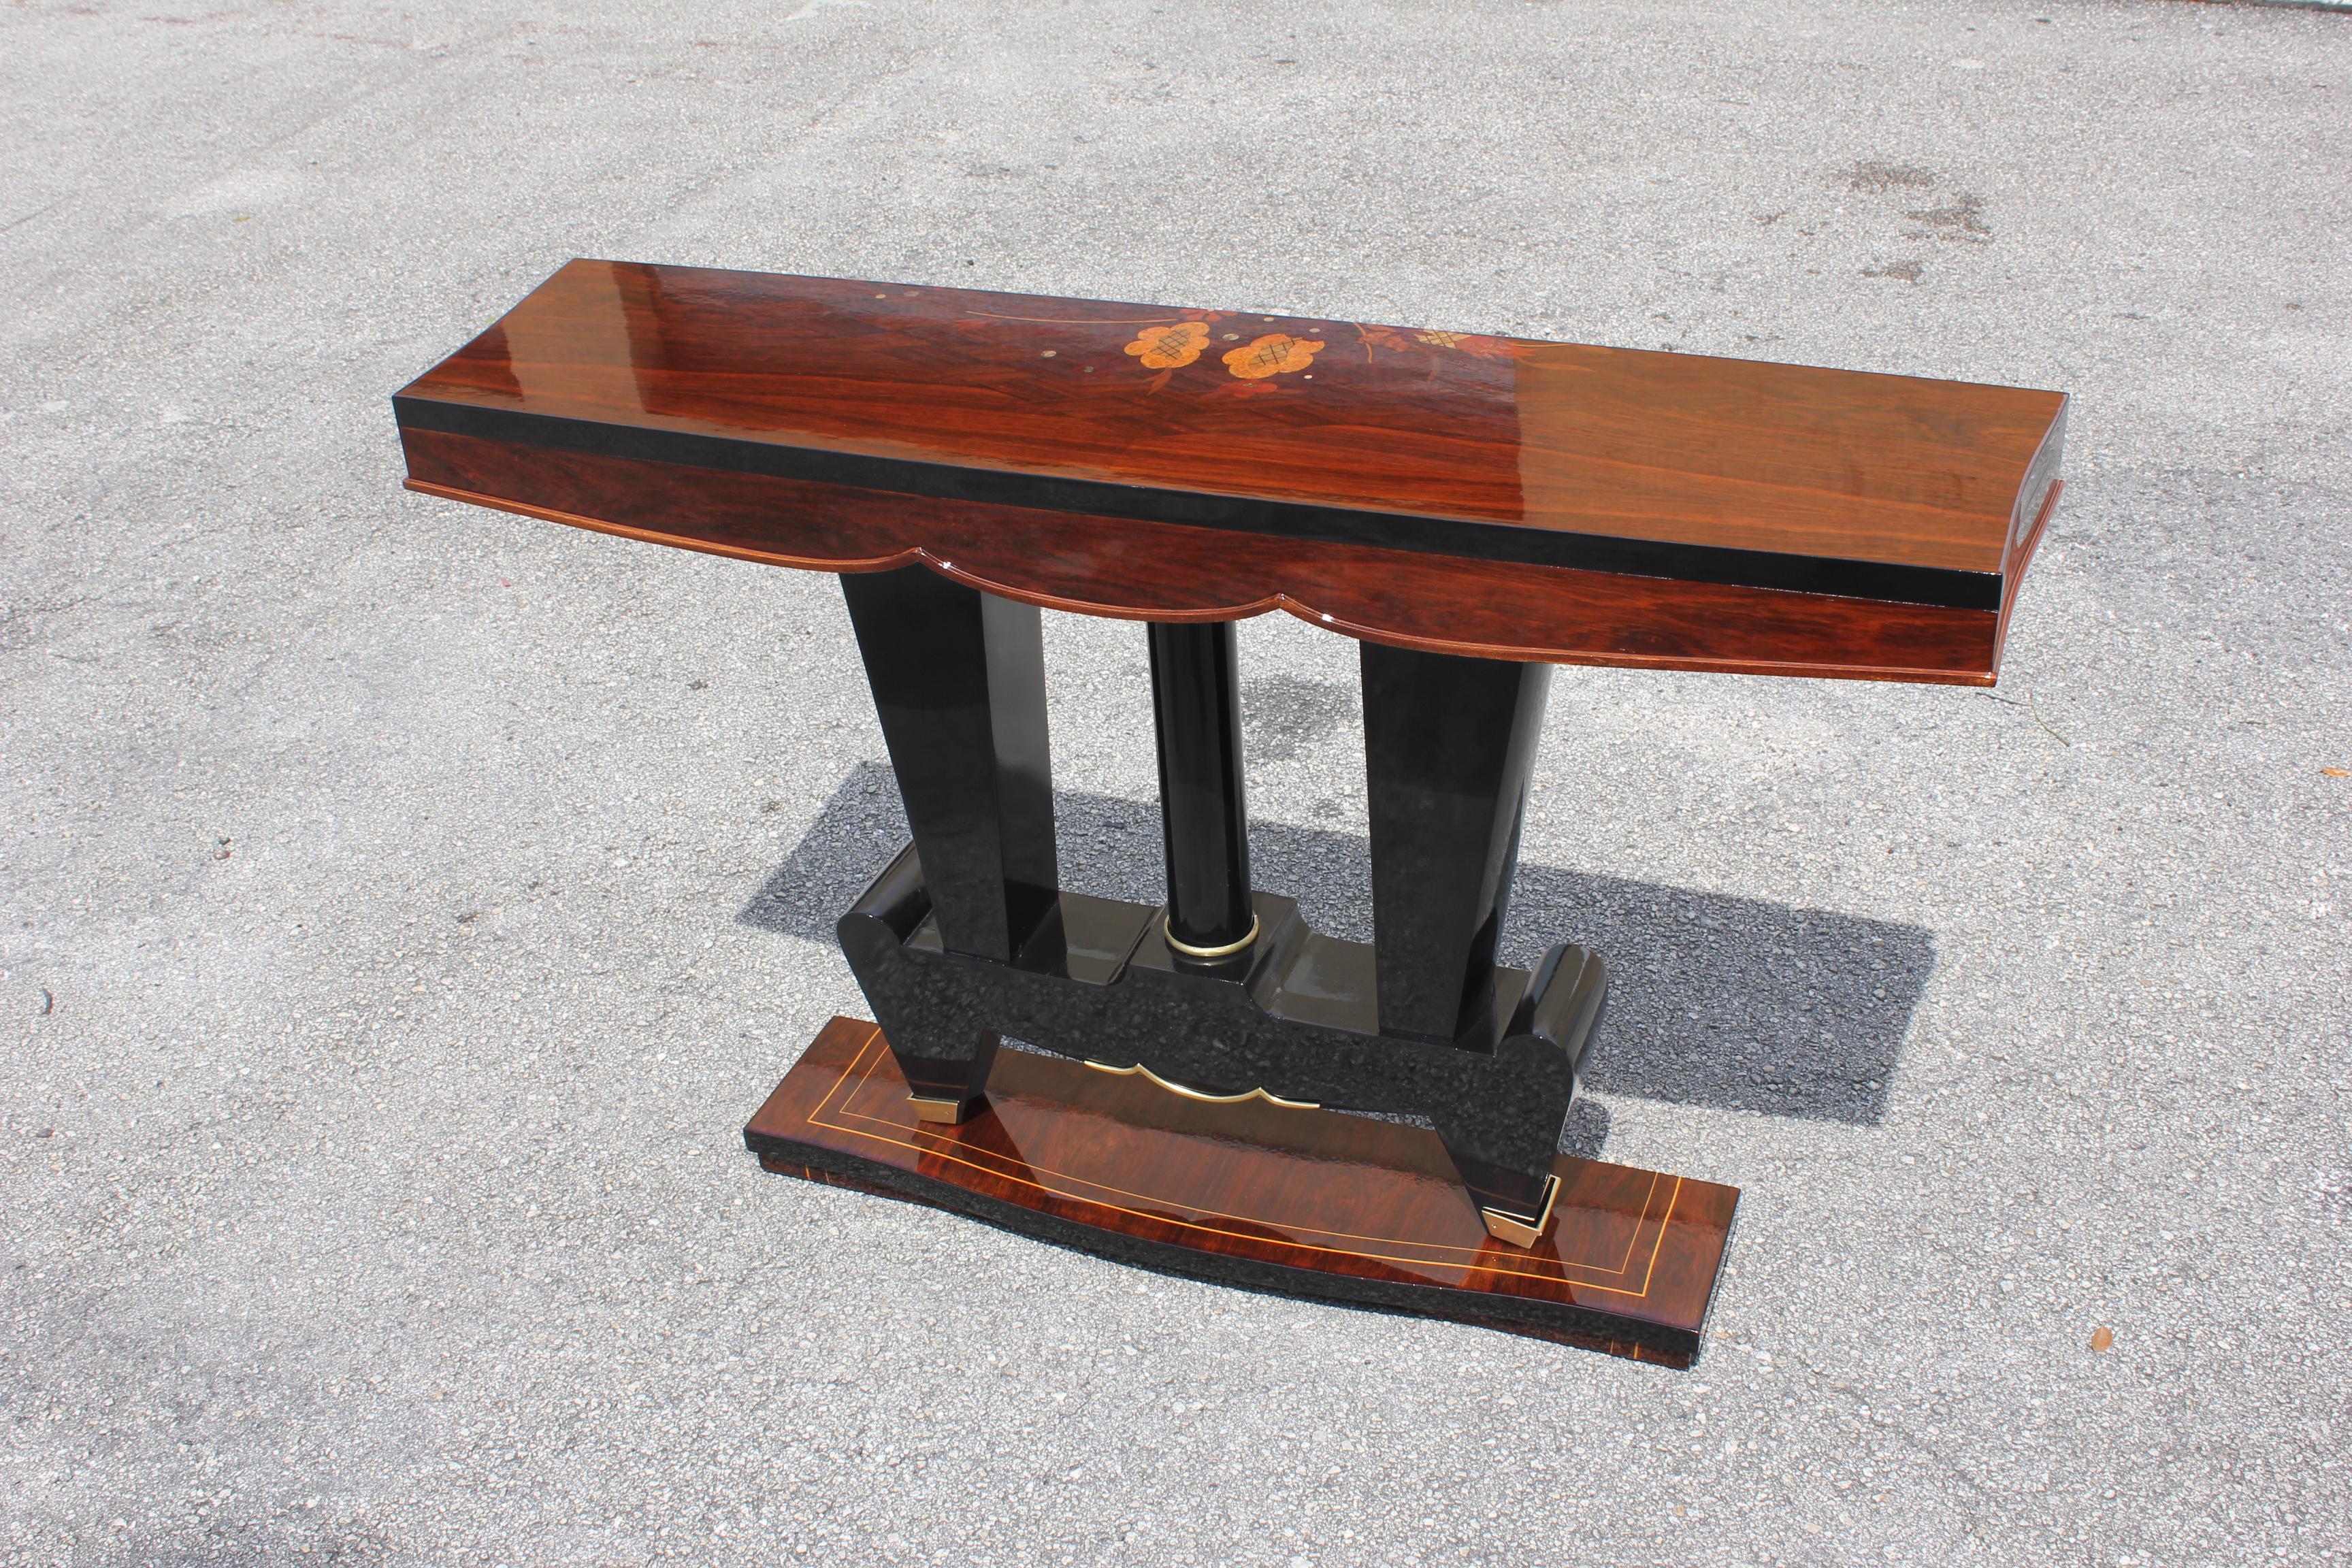 Classic French Art Deco exotic Macassar ebony console tables, circa 1940s. Beautiful parquetry design exotic Macassar ebony top with black lacquer centre base, finish in both side, beautiful bronze hardware detail, that rest on makes it ideal for